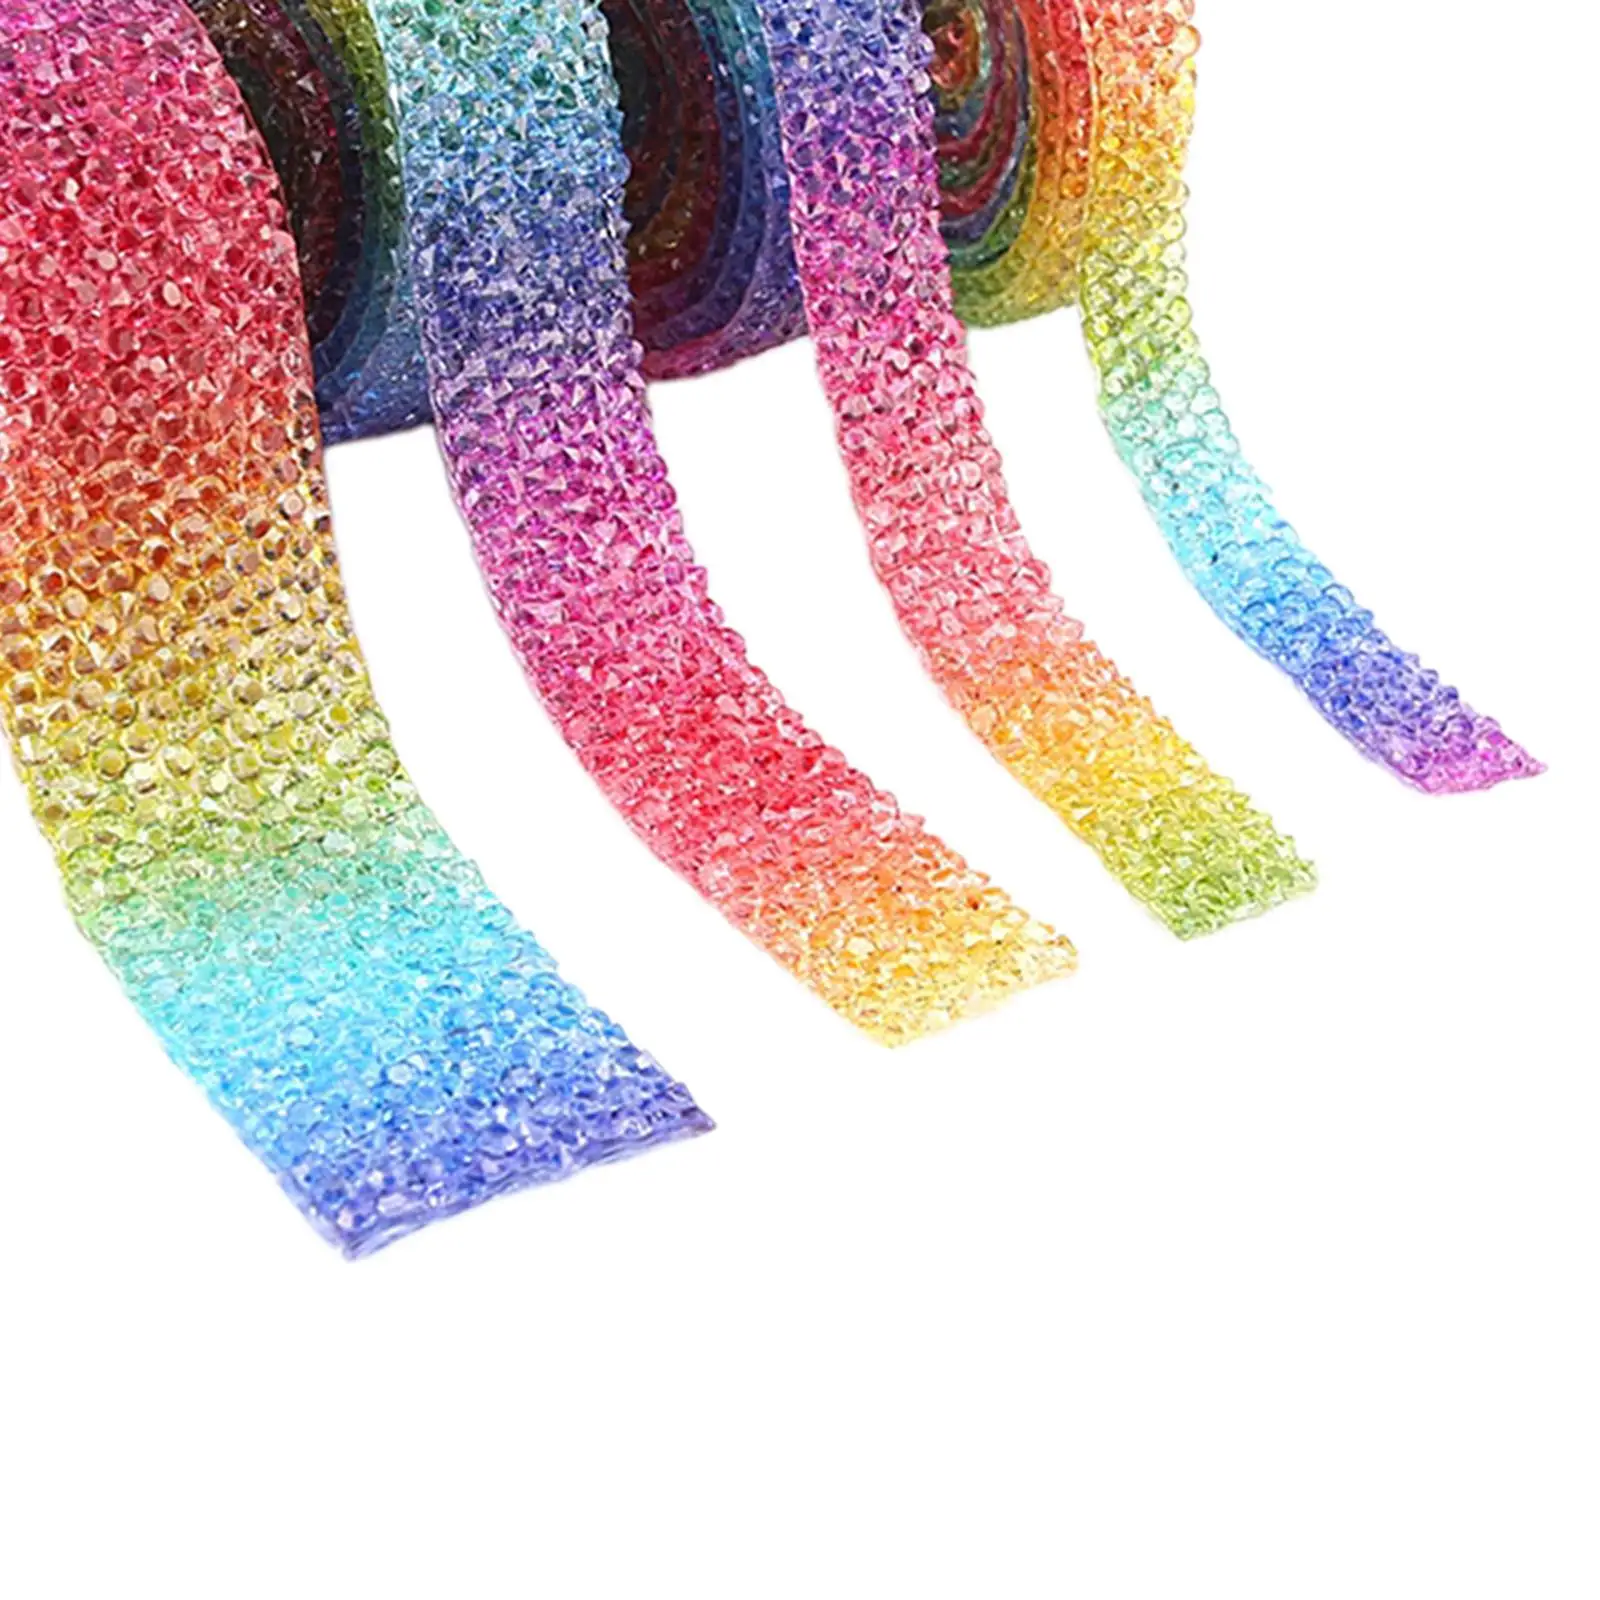 4 Roll Self Adhesive Ribbons DIY Glitter Trimming Embellishment Bling Ribbons for Bedroom Cakes Birthday Party Wedding Bathroom